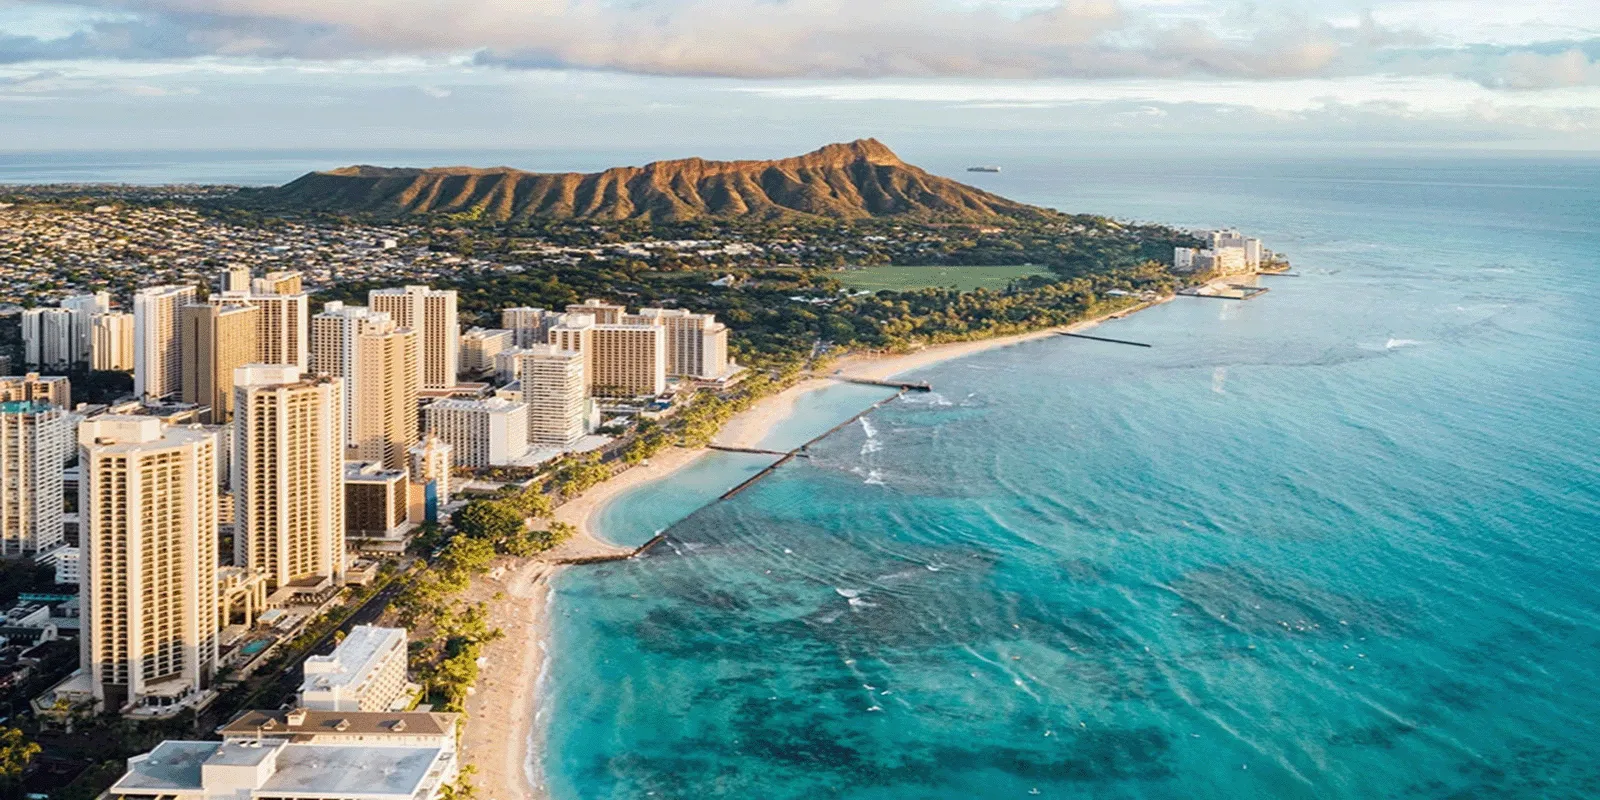 8 Best Hotels in Hawaii, National Treasure of USA